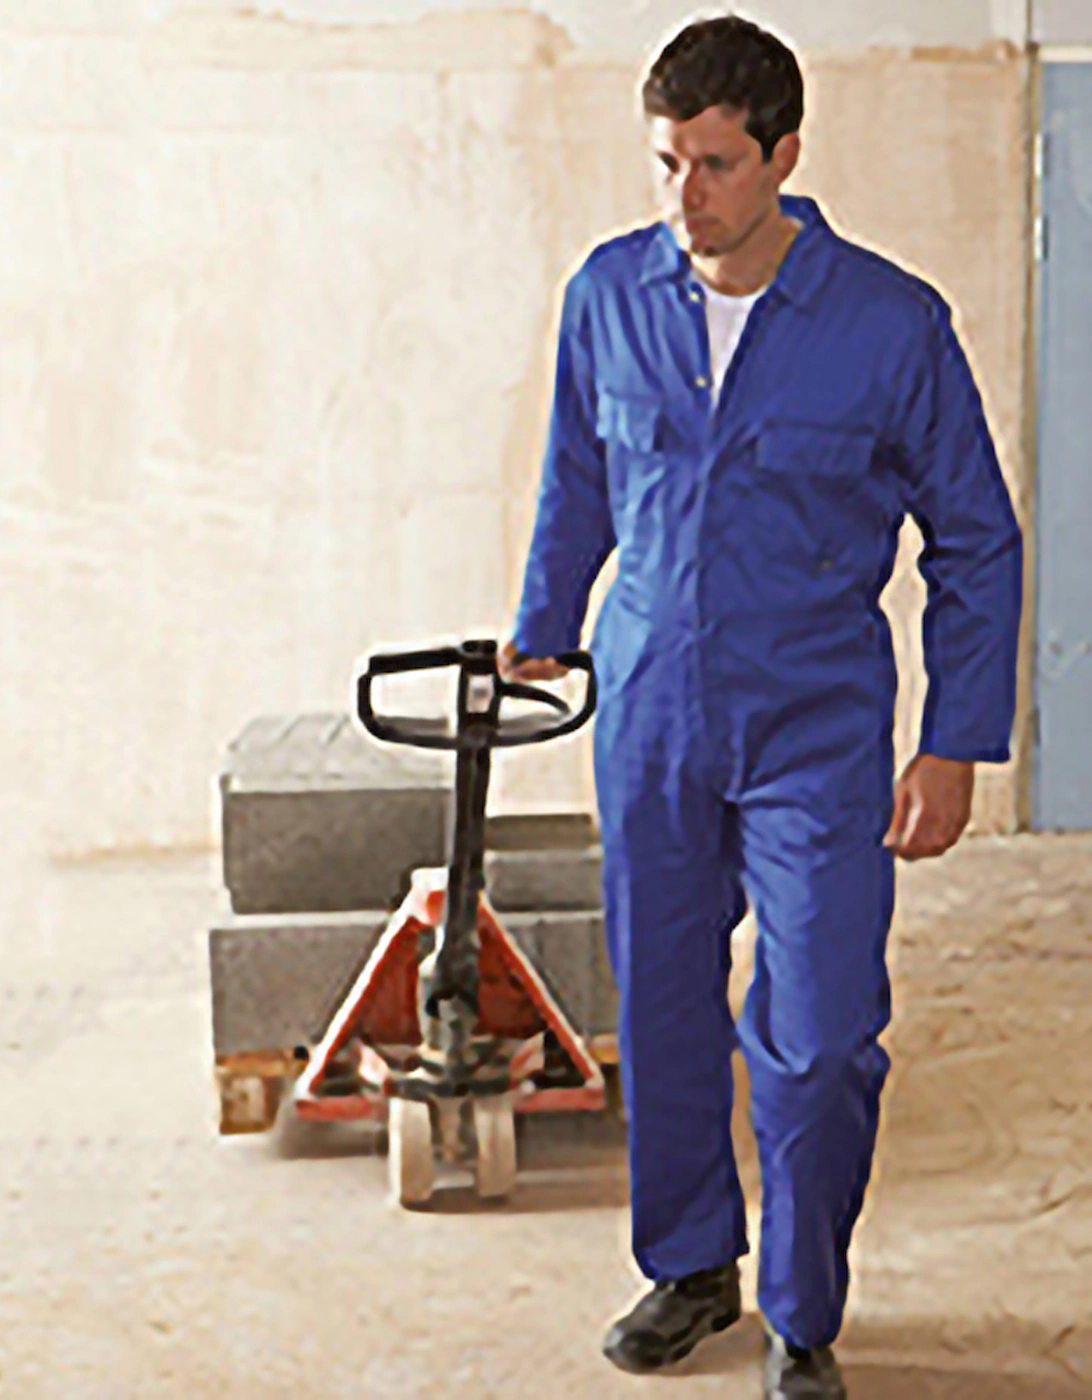 Mens Euro Work Polycotton Coverall (S999) / Workwear